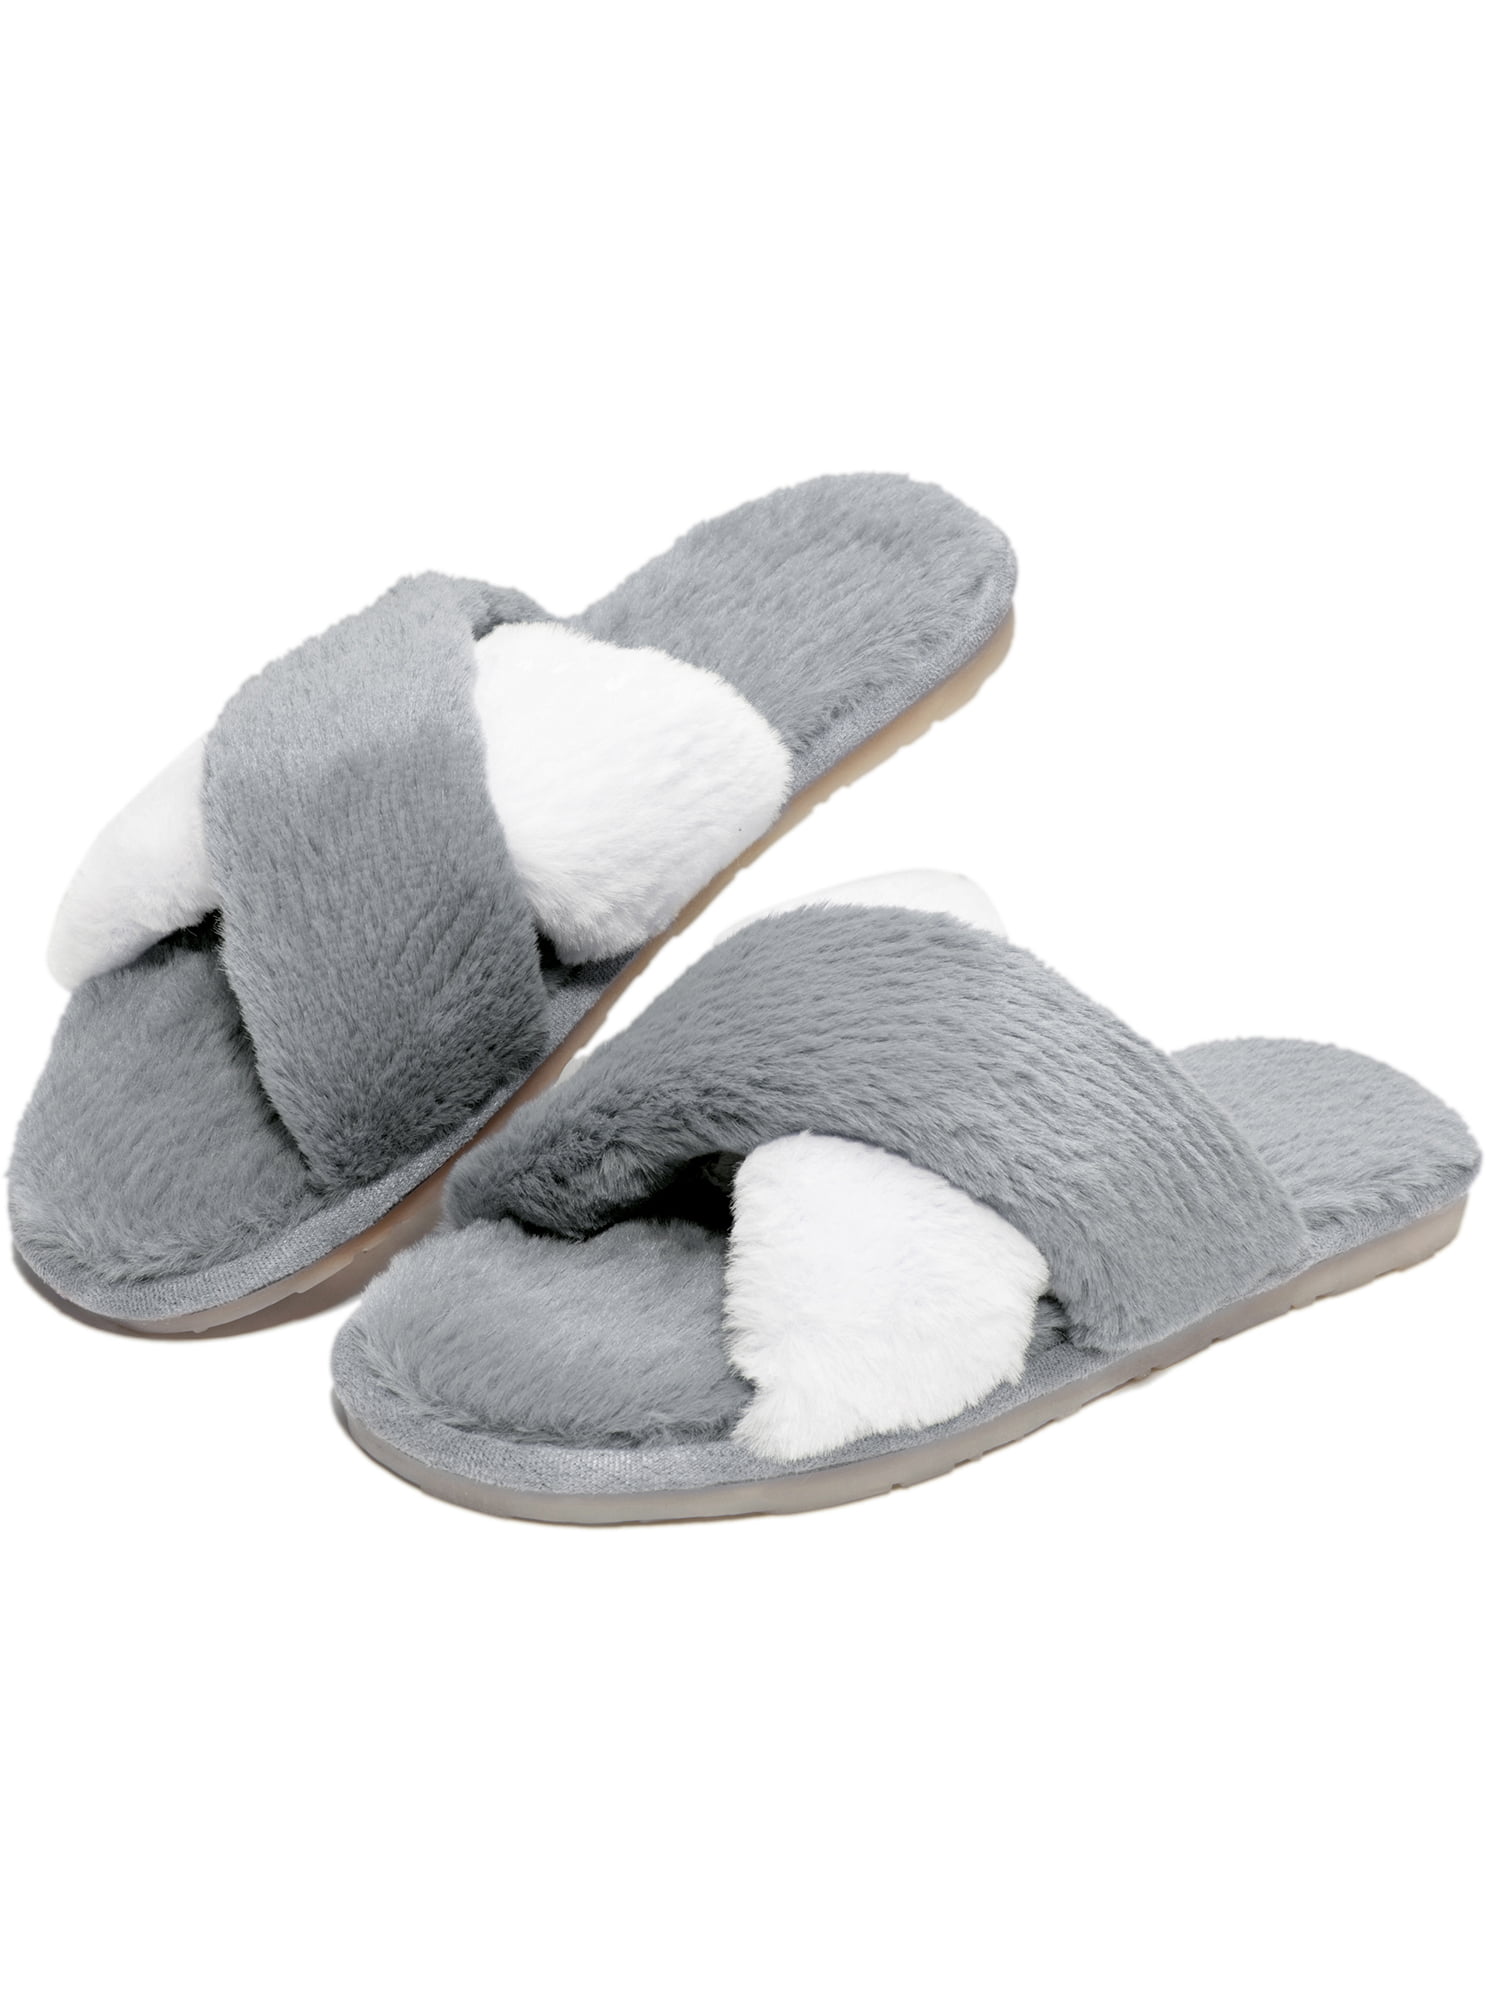 FITORY Womens Open Toe Fuzzy Slippers Faux Fur Fluffy House Slides with Cork Footbed Size 4-9